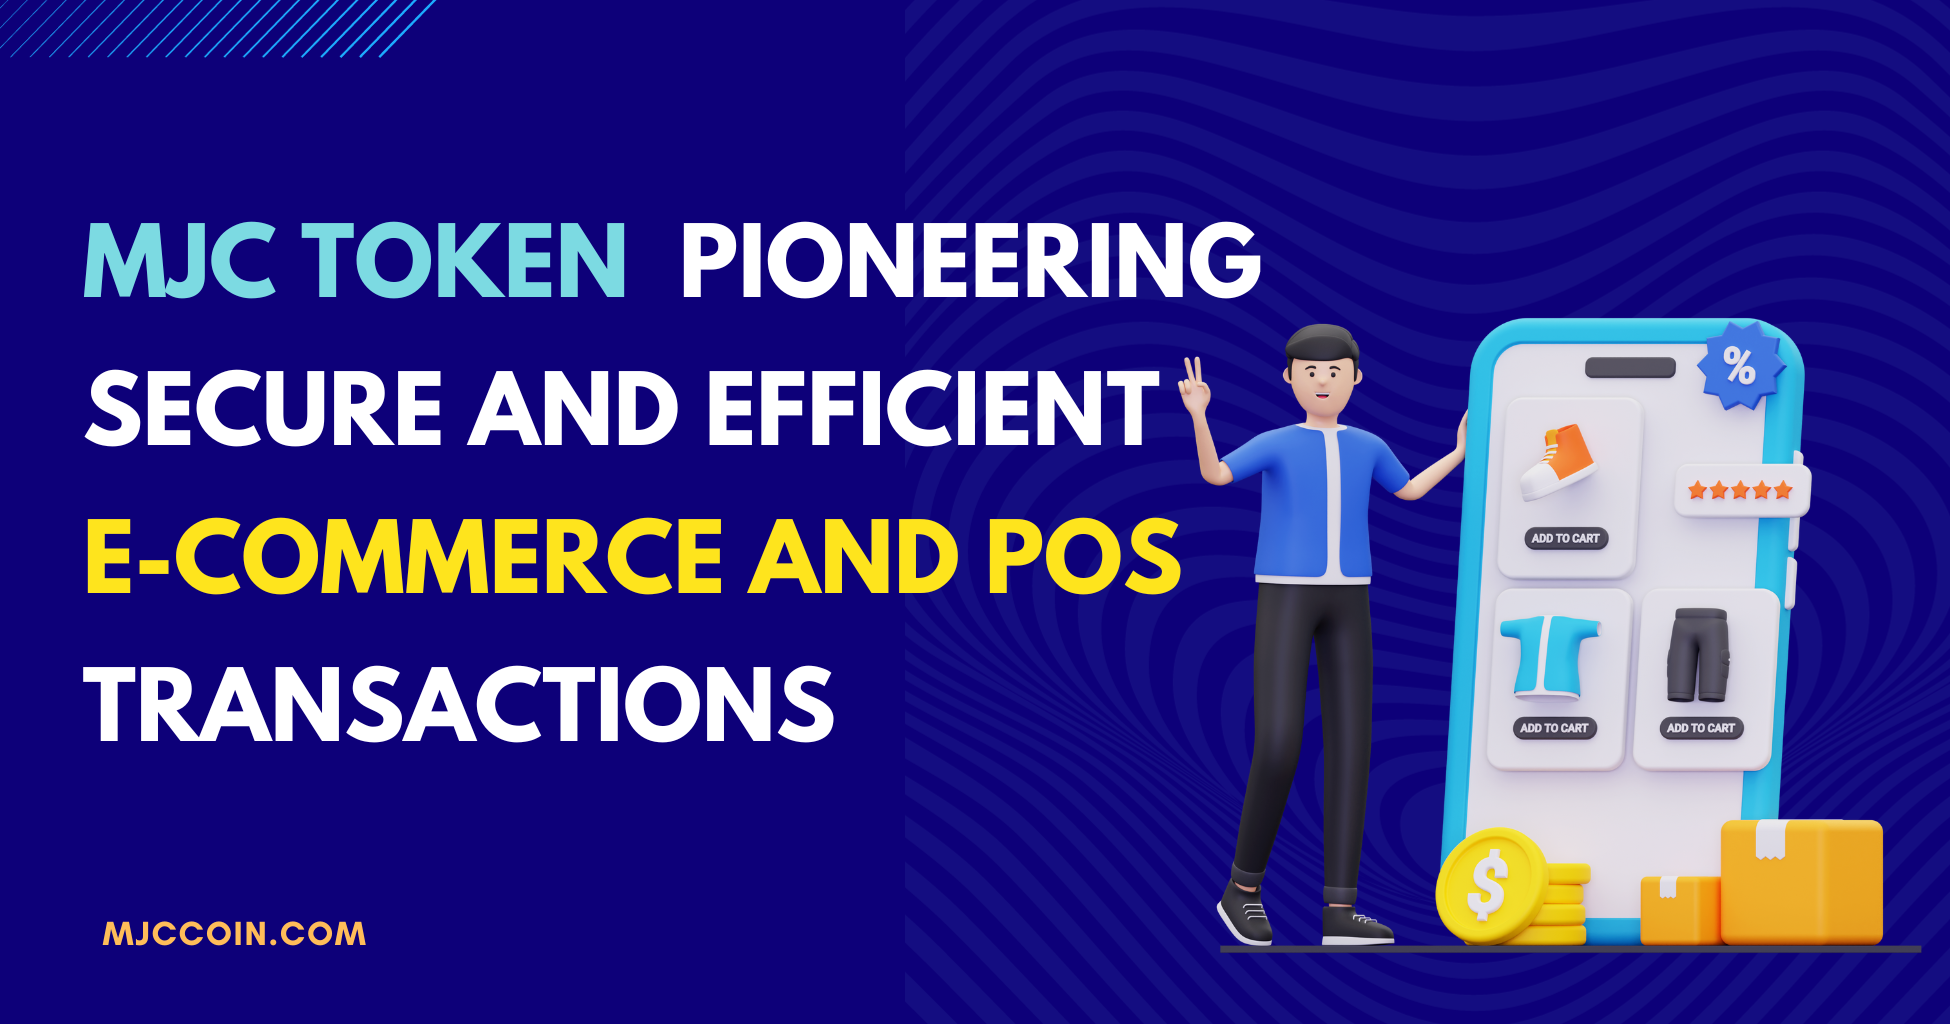 MJC Token: Pioneering Secure and Efficient E-commerce and POS Transactions